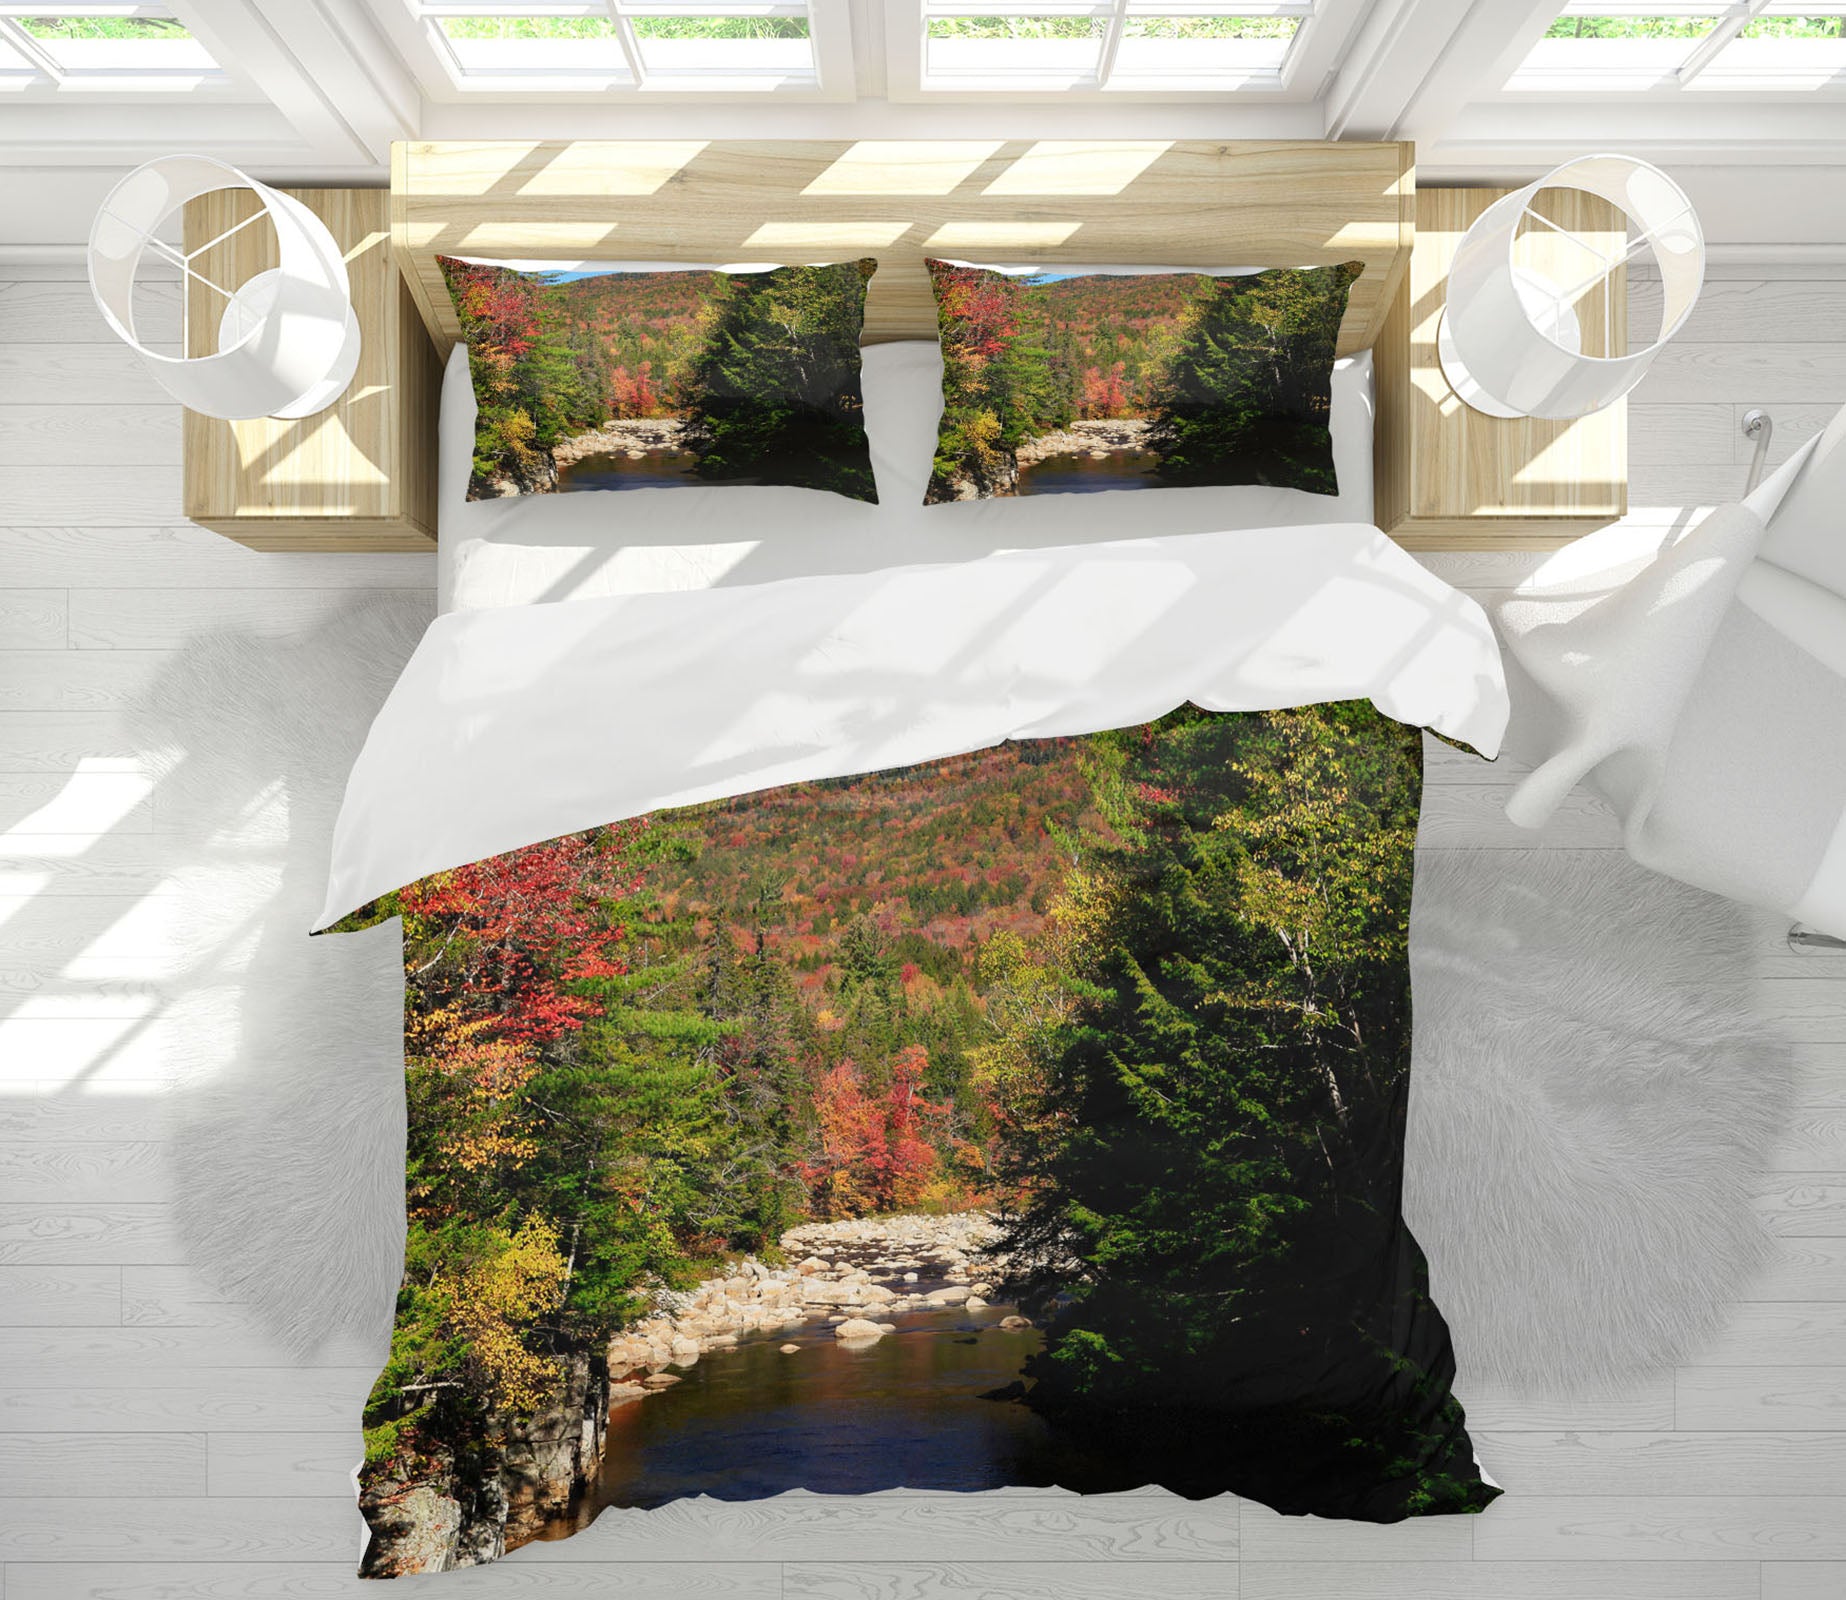 3D River Bend 62194 Kathy Barefield Bedding Bed Pillowcases Quilt